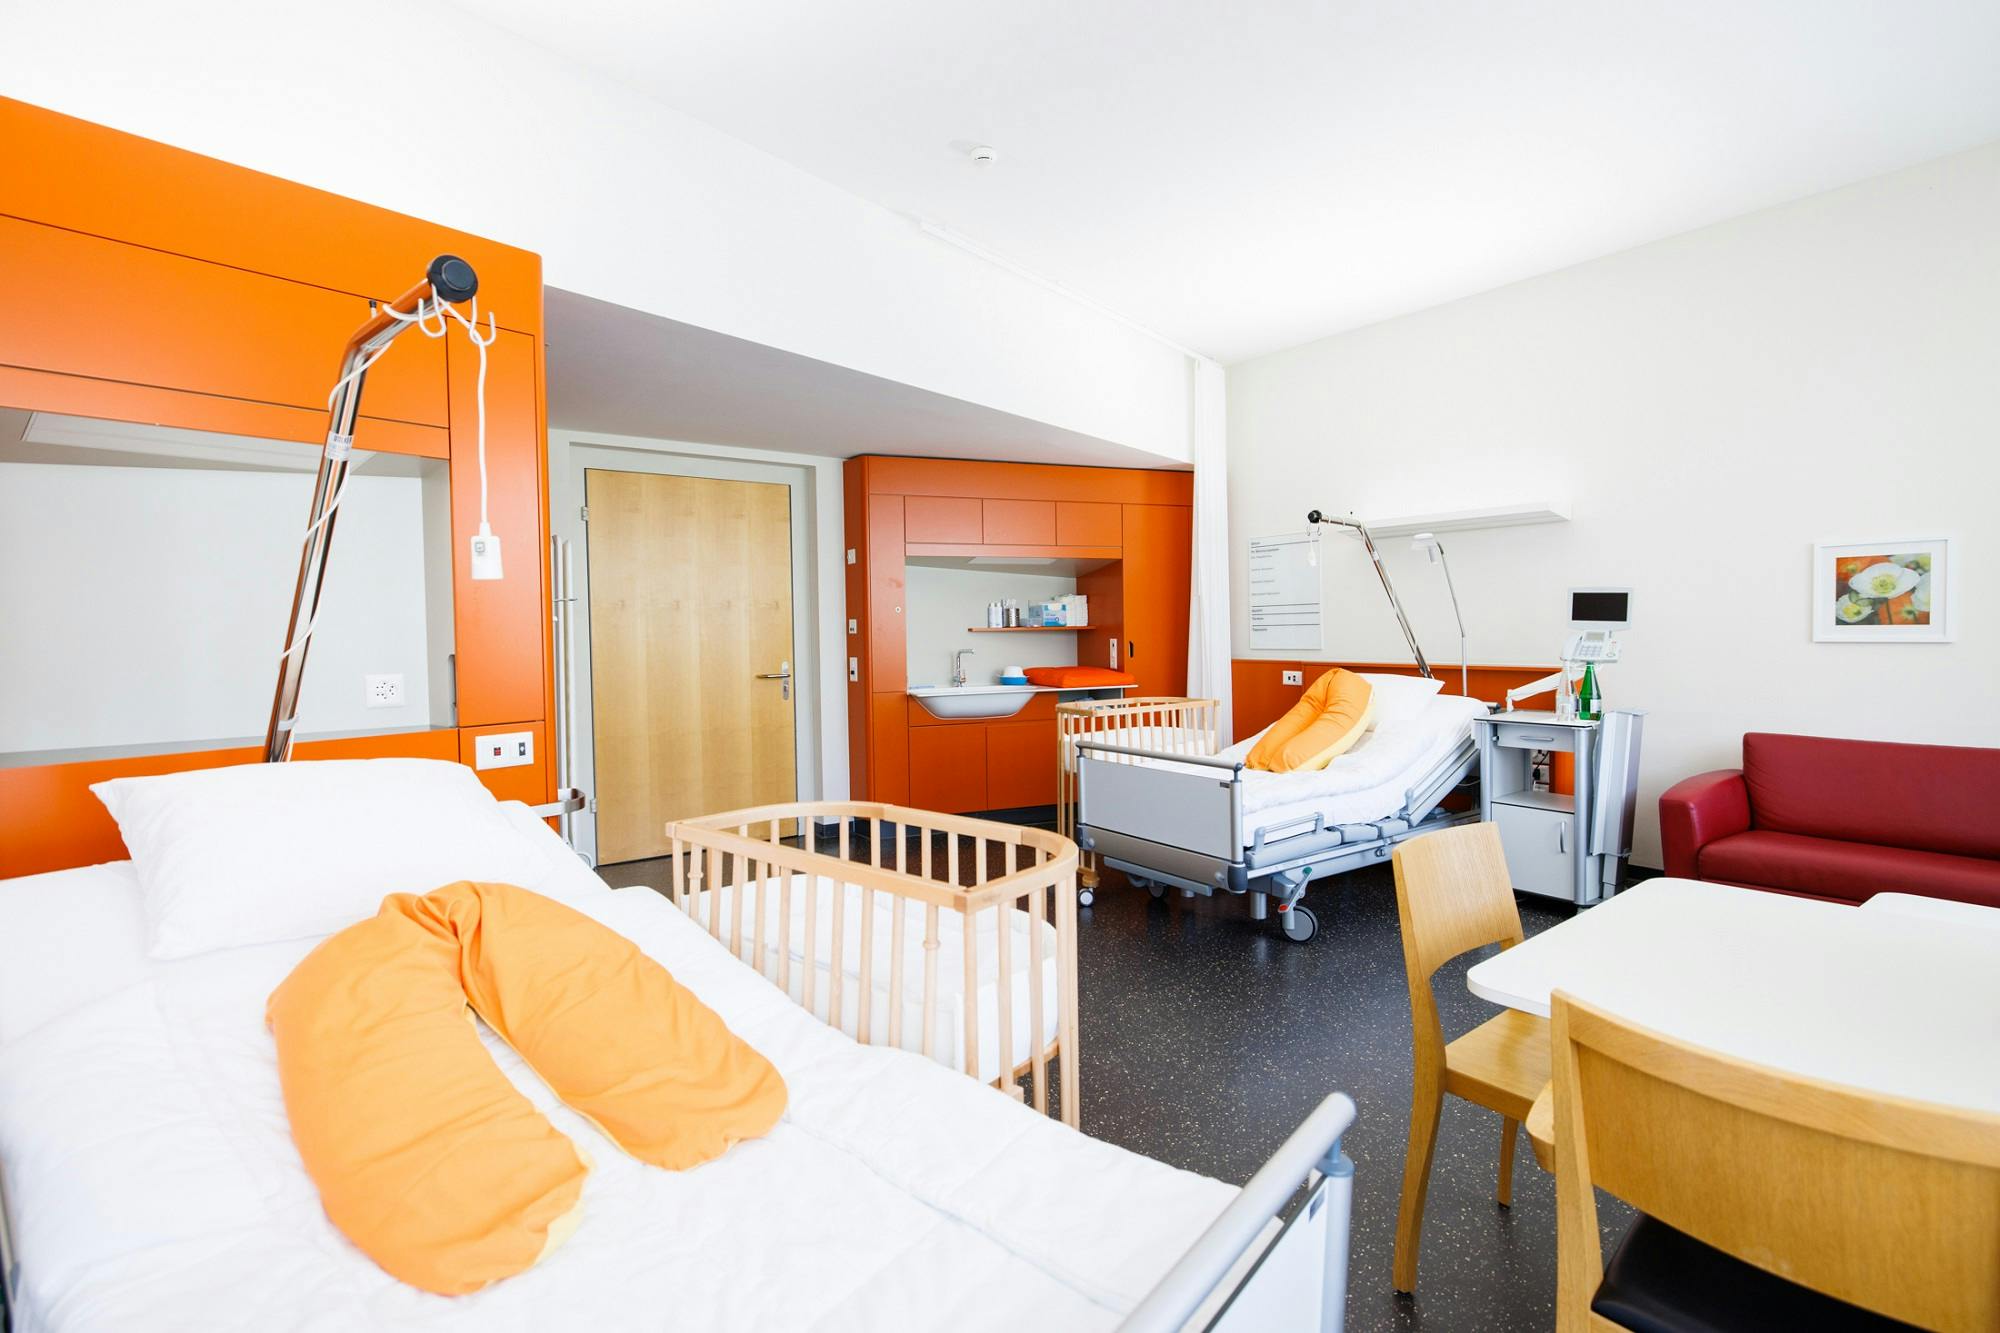 Bright hospital room with orange-coloured accents, a patient bed, a cot and medical equipment.